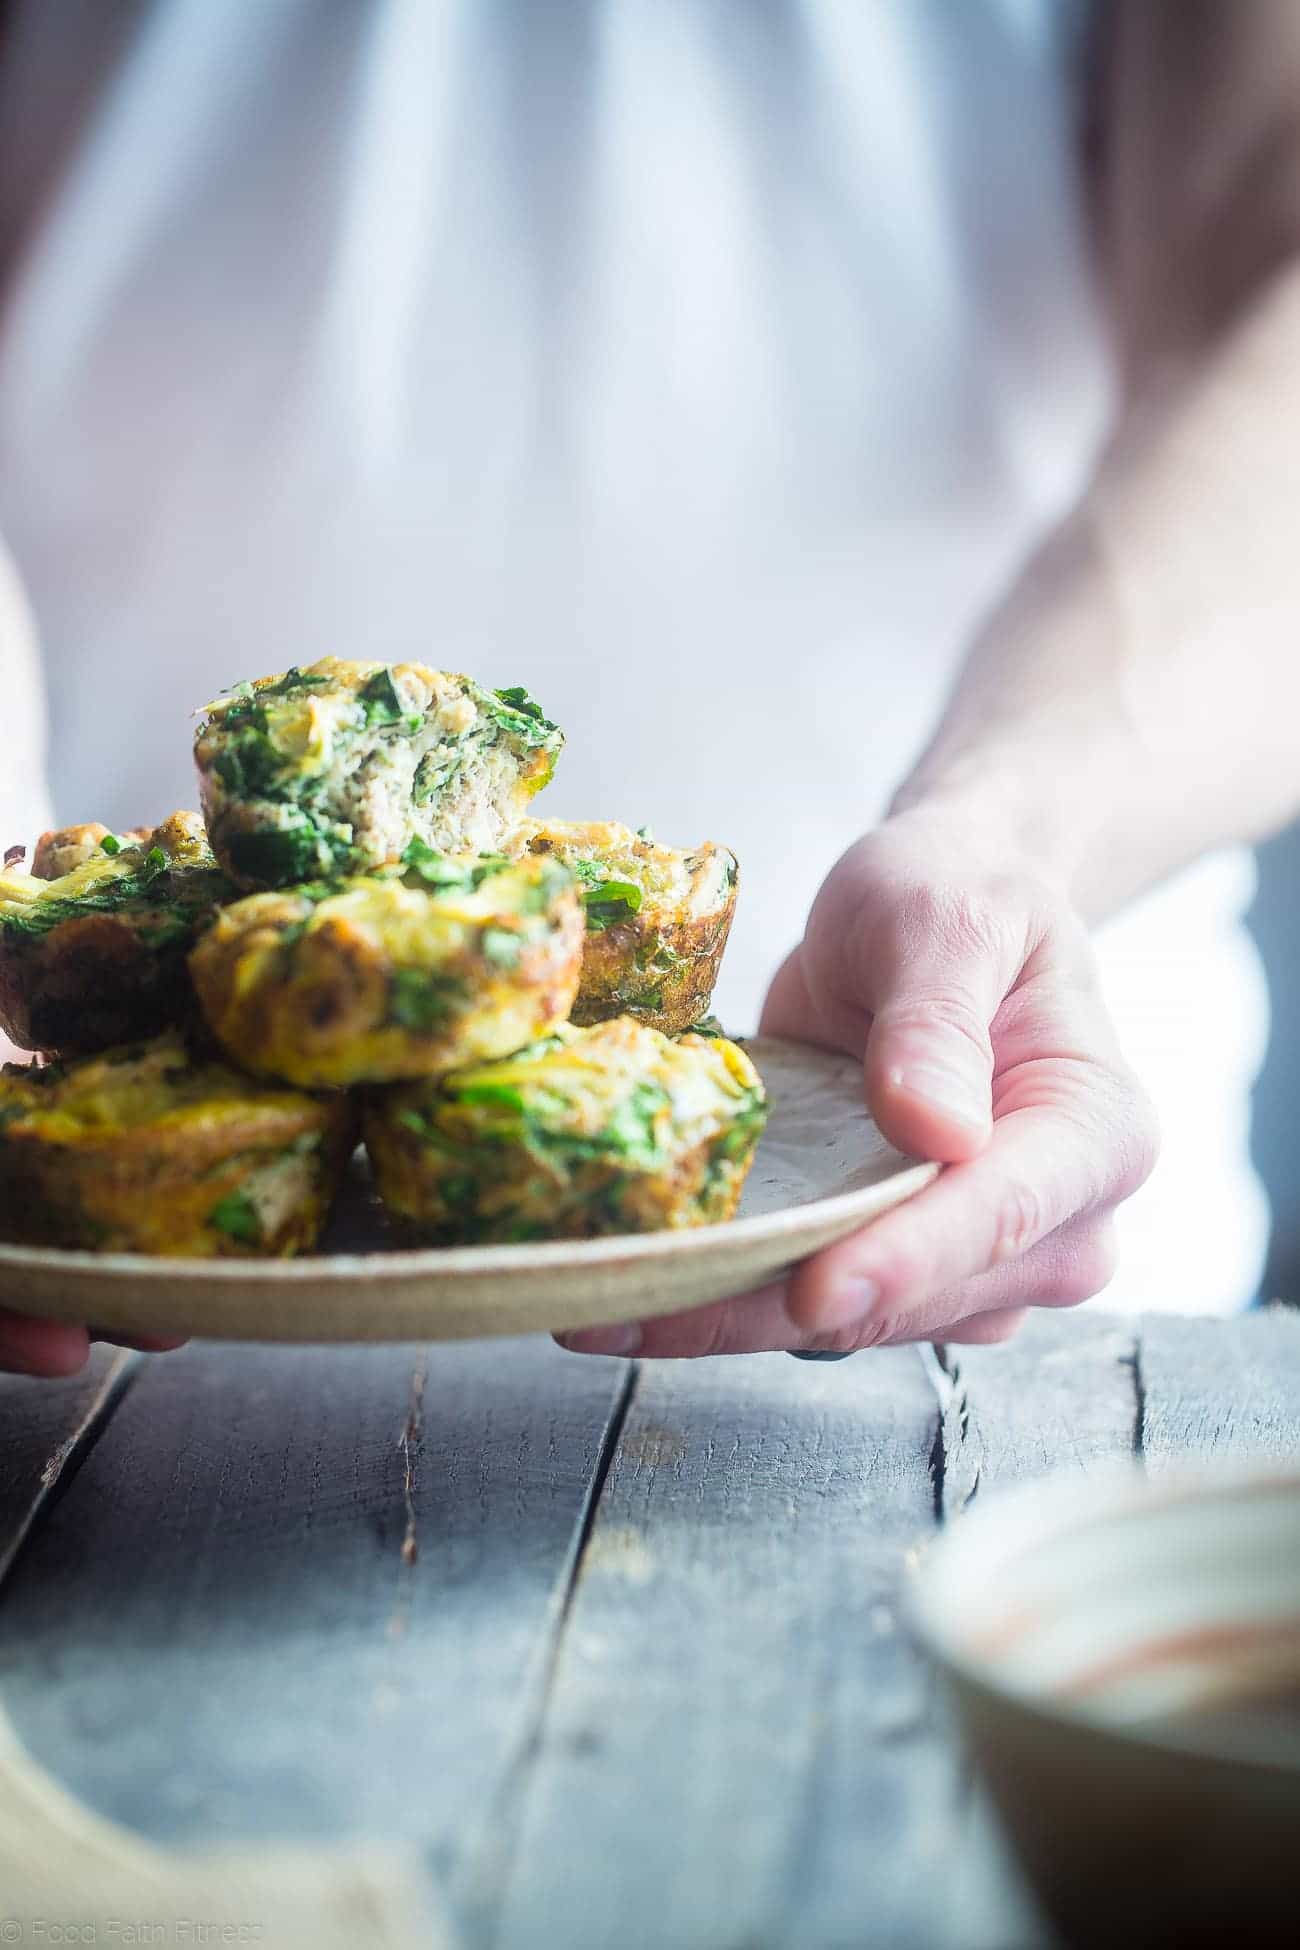 Whole30 Spinach and Artichoke Egg Muffins - These easy, 6 ingredient paleo spinach breakfast egg muffins are low carb, gluten free, and under 100 calories! Perfect for busy mornings! | Foodfaithfitness.com | @FoodFaithFit